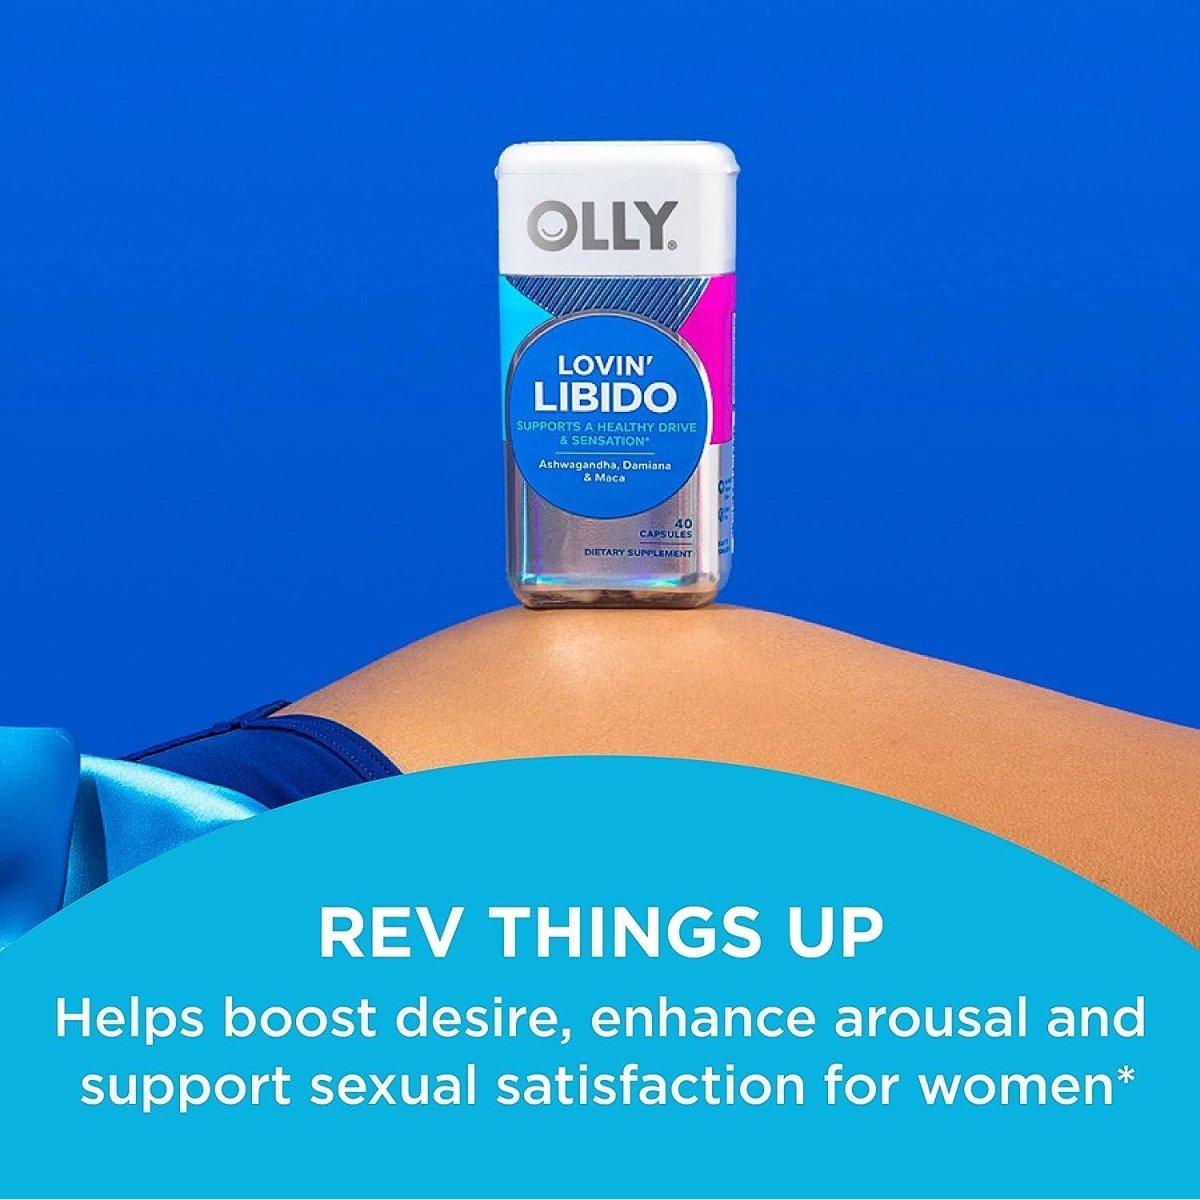 OLLY Lovin Libido Capsules a Healthy Drive & Sensation Promotes Supplement for Women, 20 Day Supply (40 Count) - Glam Global UK